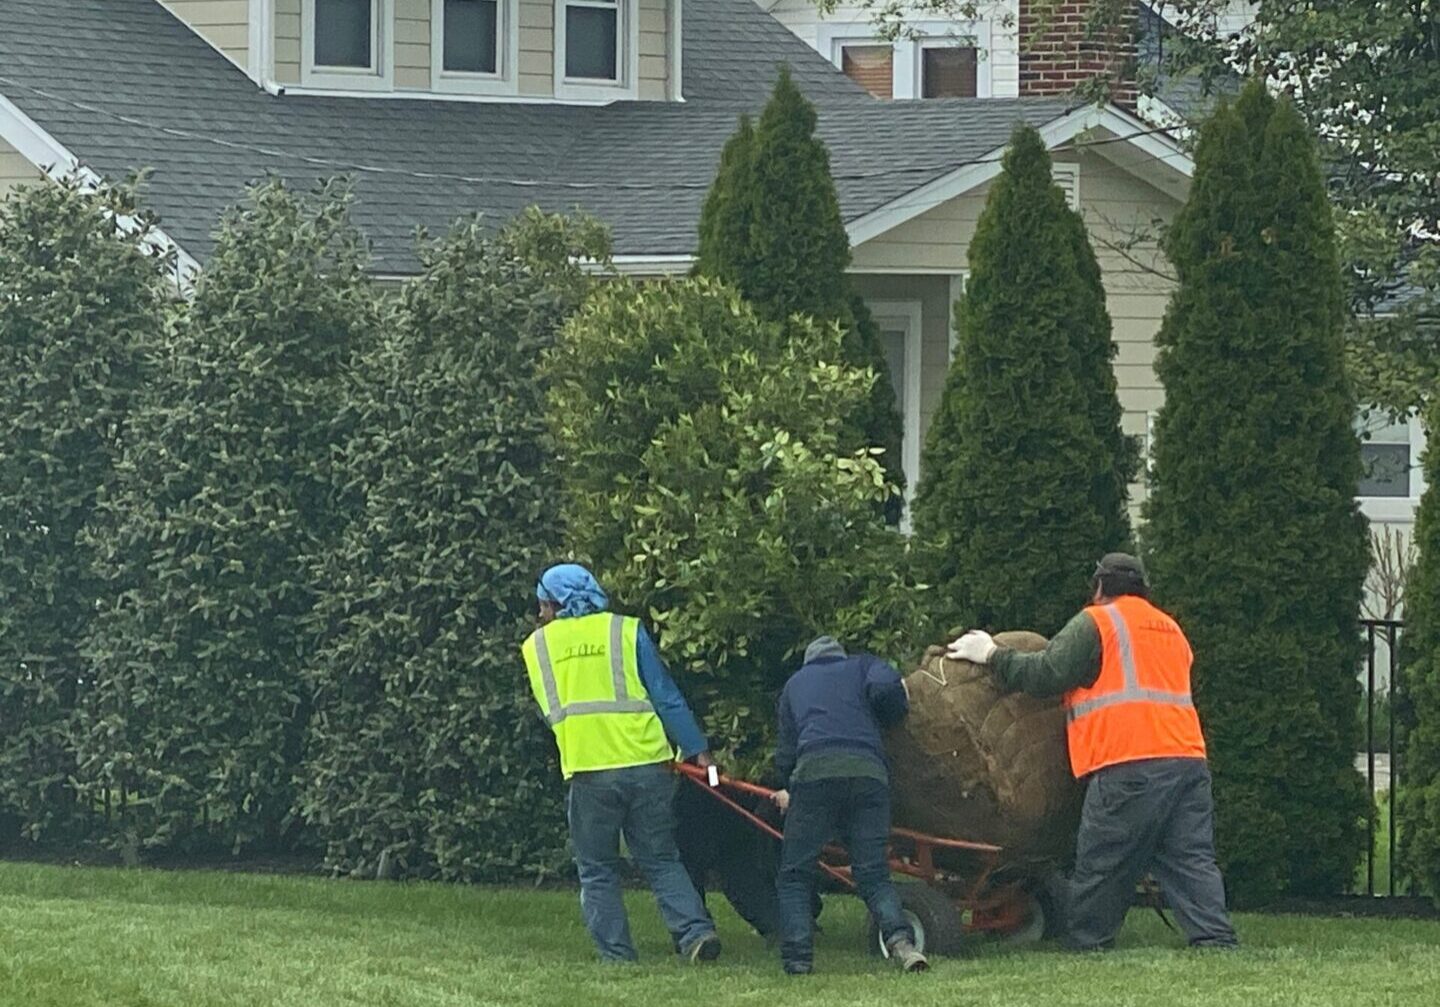 Three men pushing a cart in the grass.